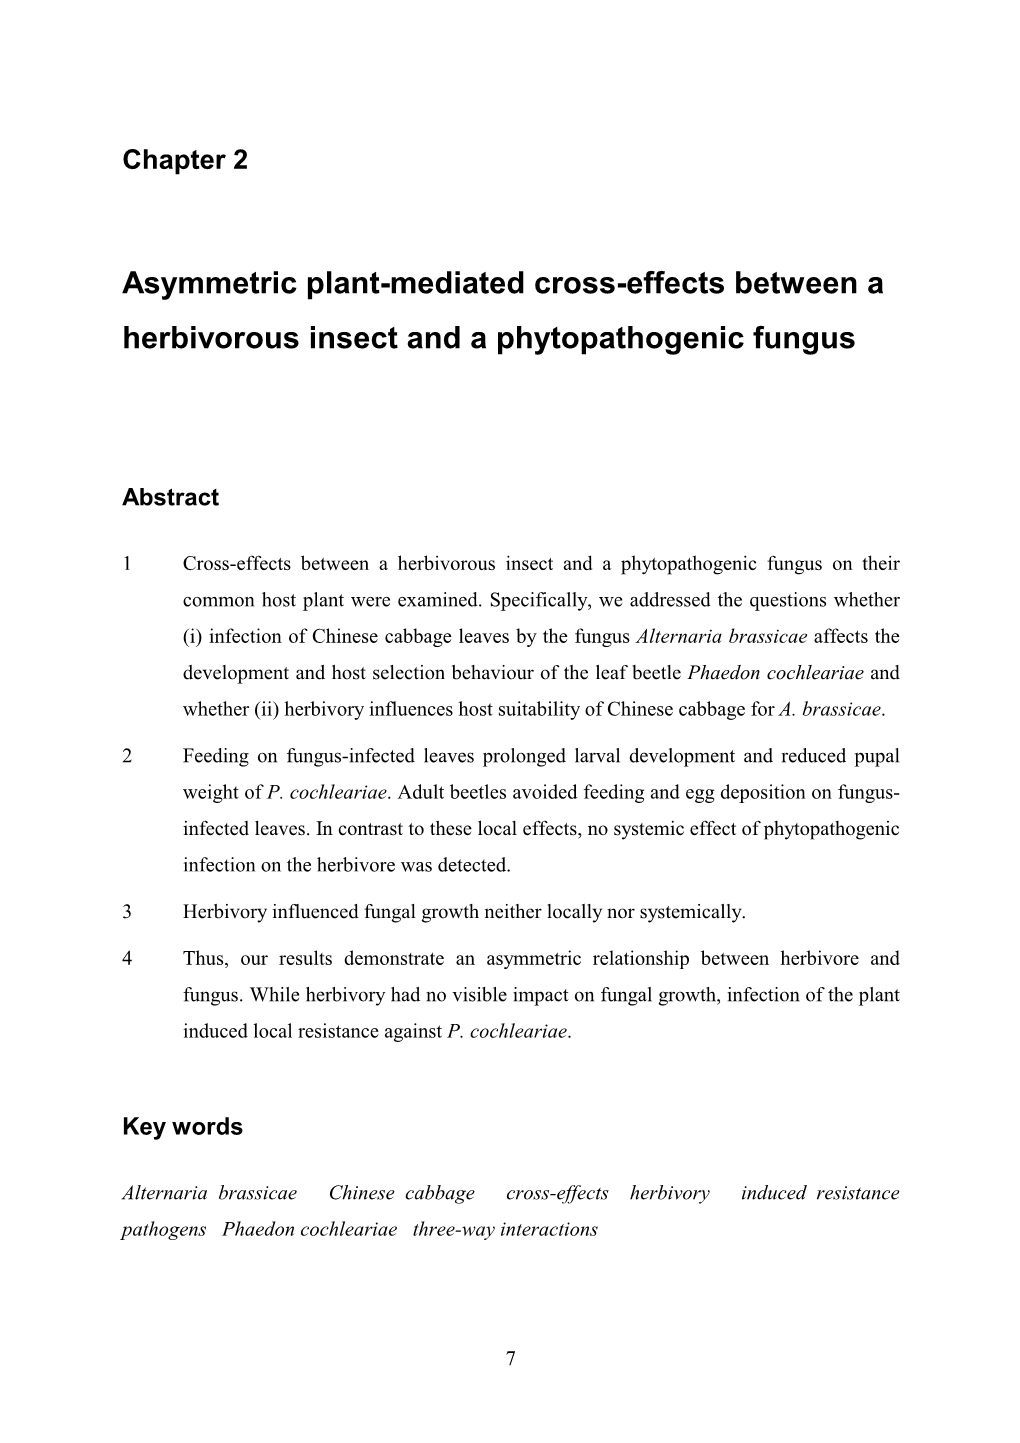 Asymmetric Plant-Mediated Cross-Effects Between a Herbivorous Insect and a Phytopathogenic Fungus